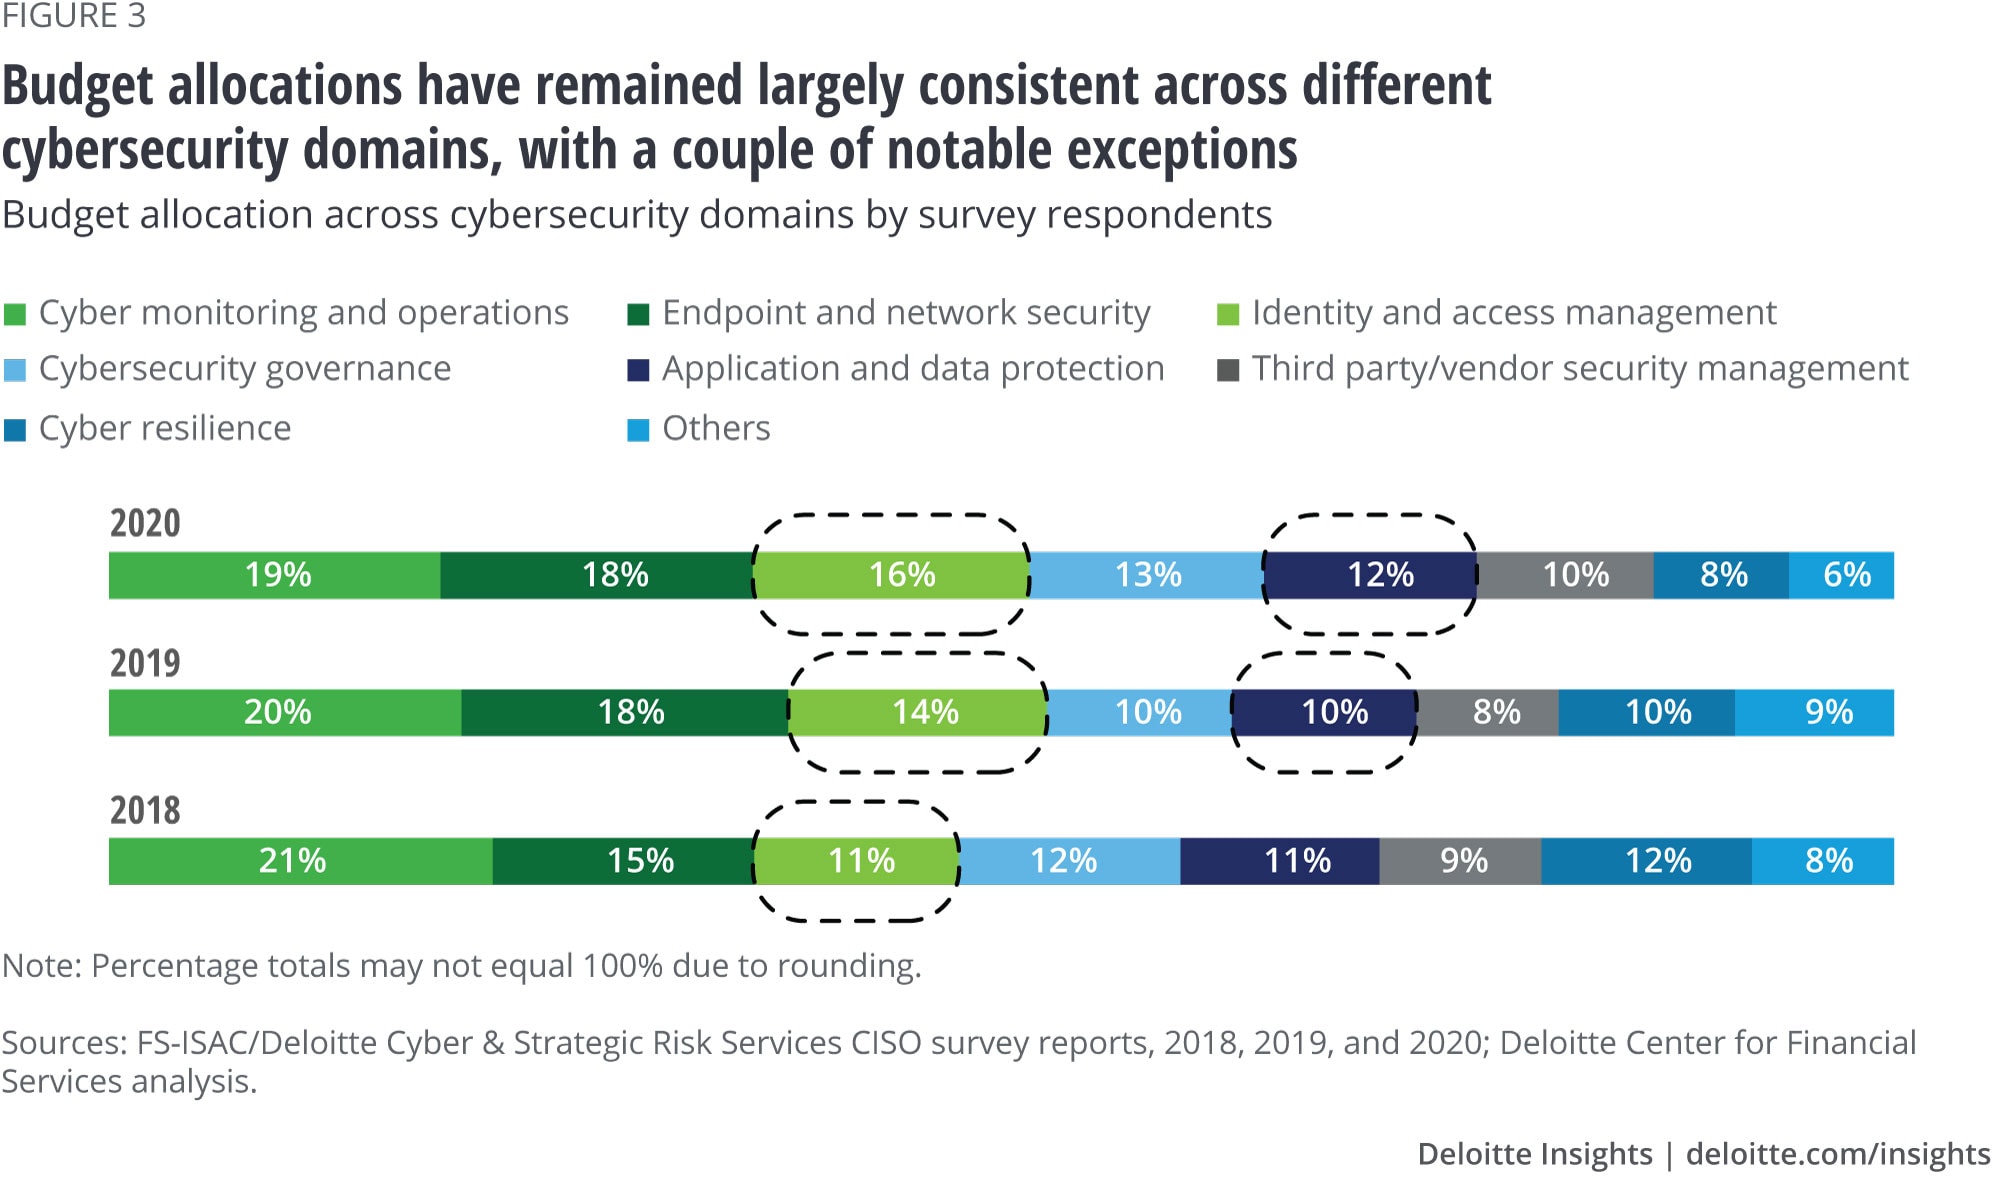 Budget allocations have remained largely consistent across different cybersecurity domains